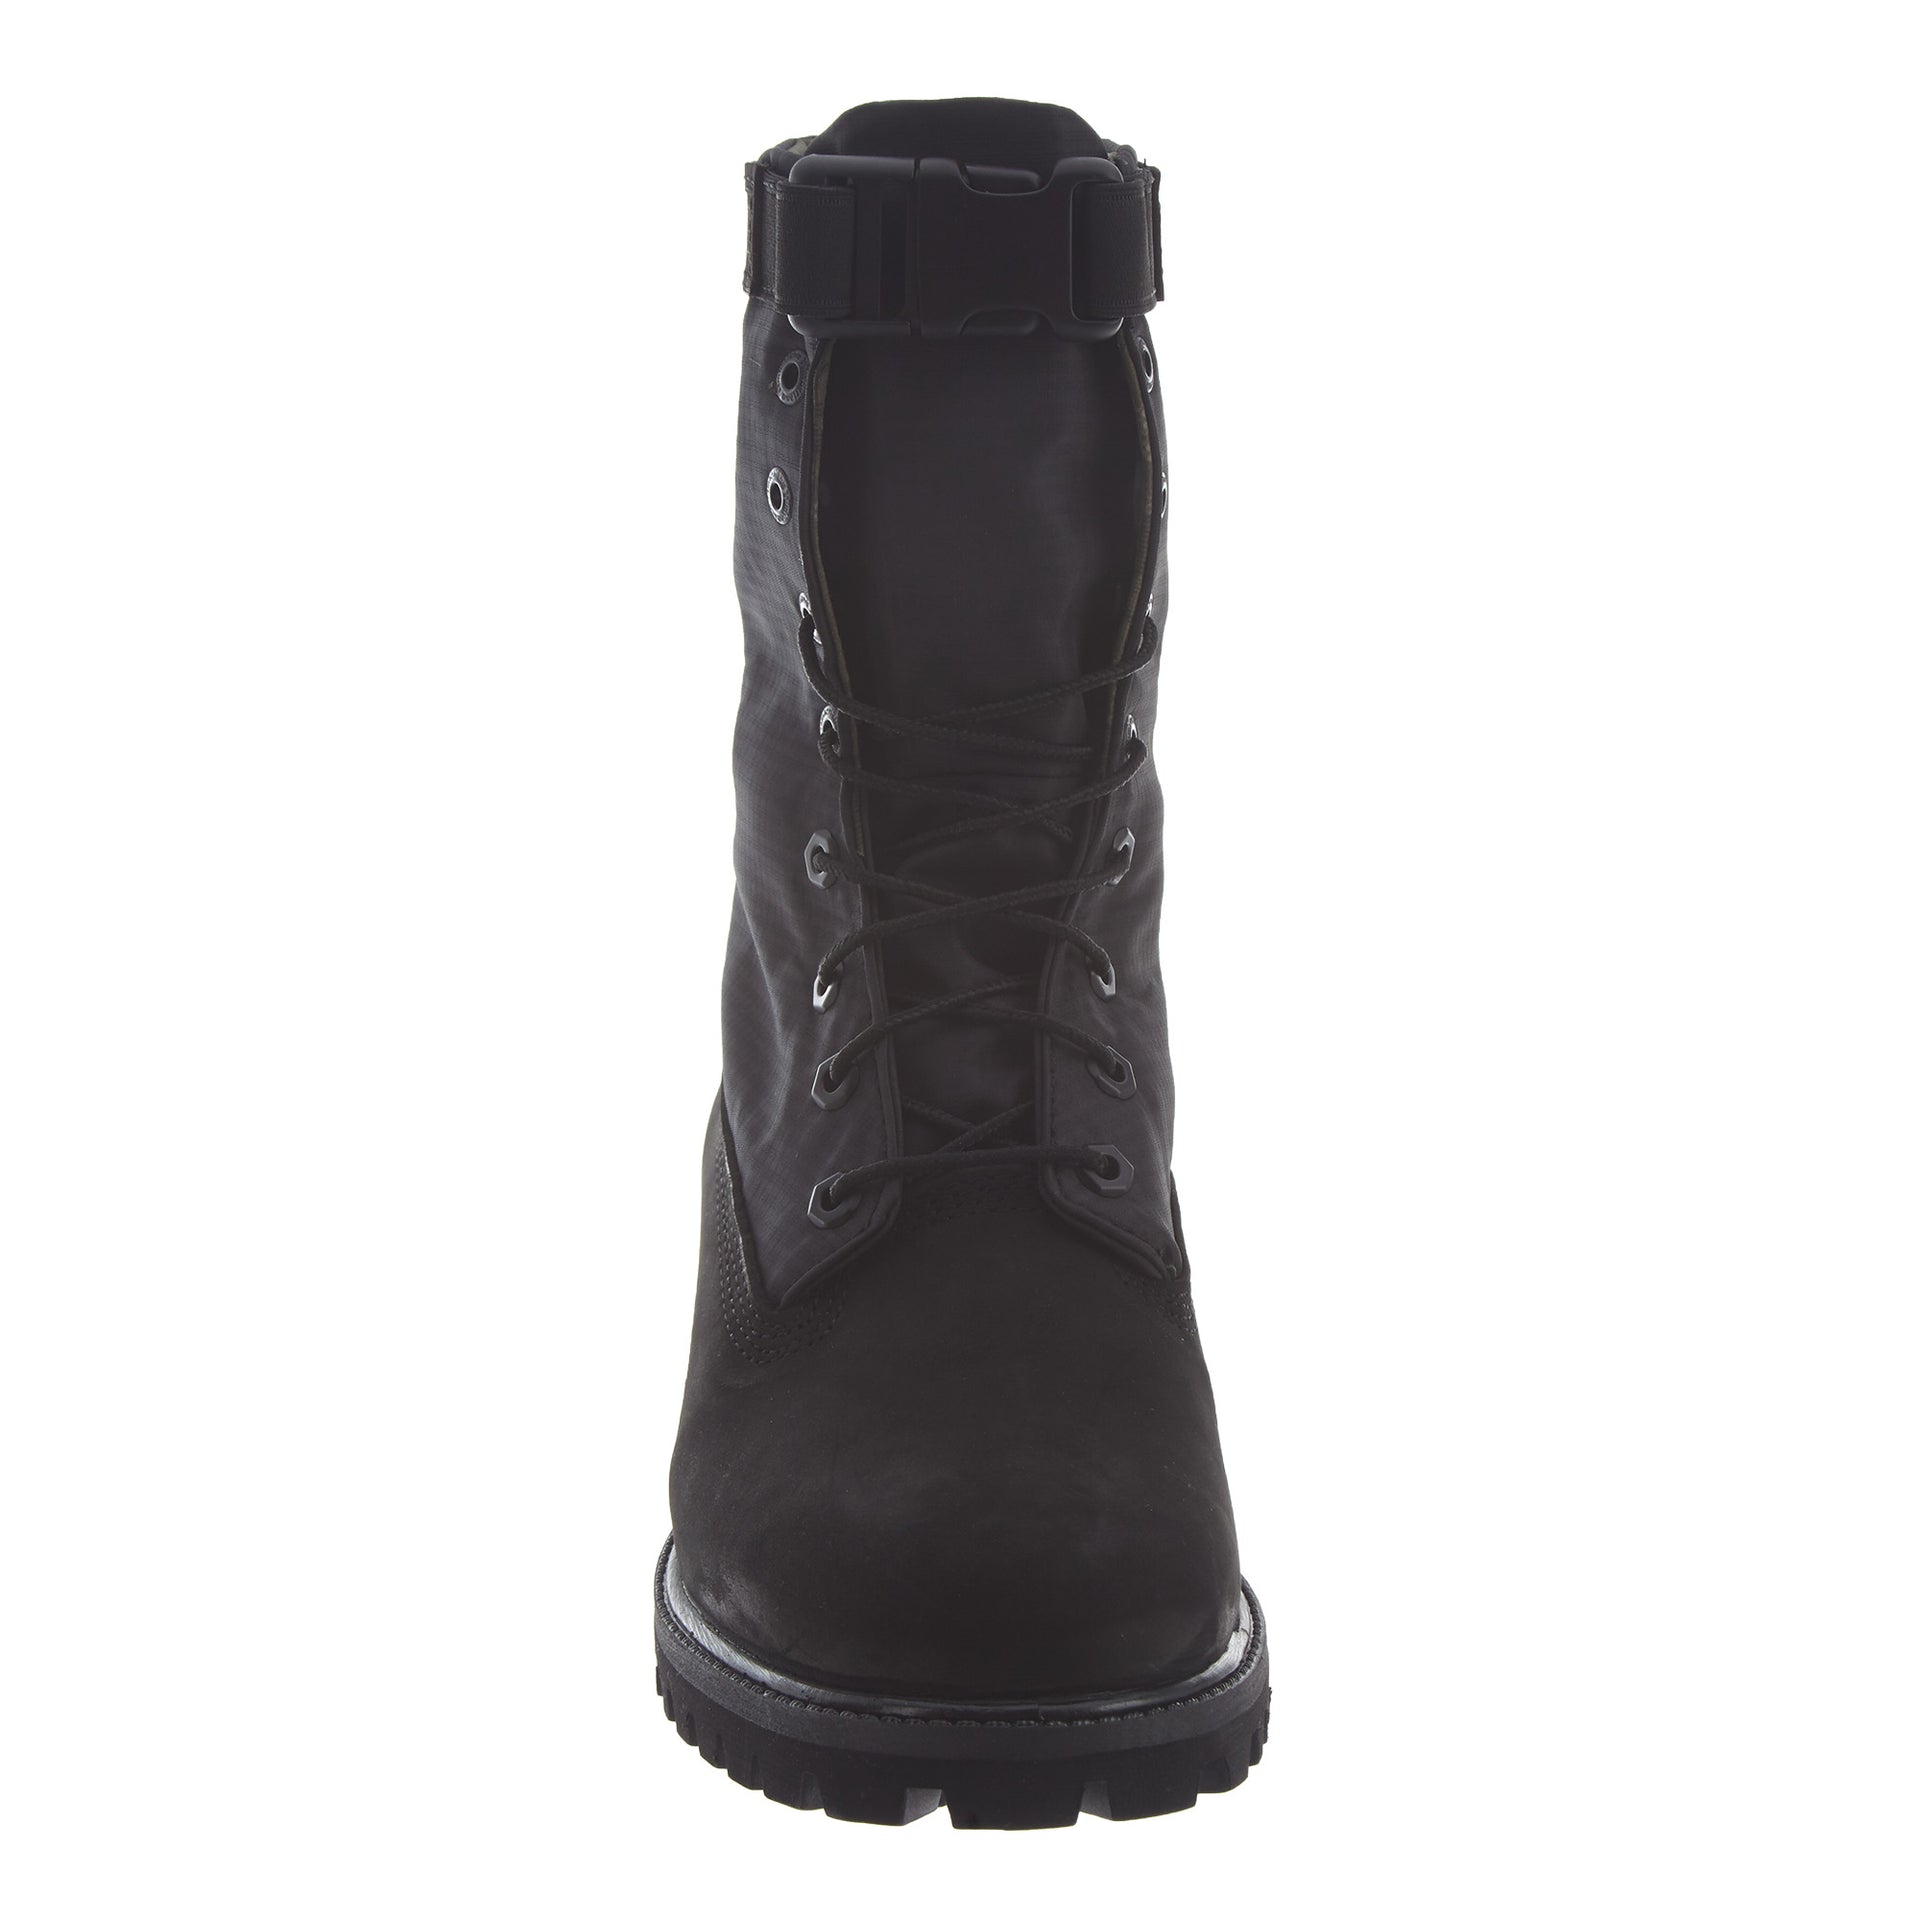 Timberland 6" Premium Gaiter Boot Mens Style : Tb0a1ubp-Blk